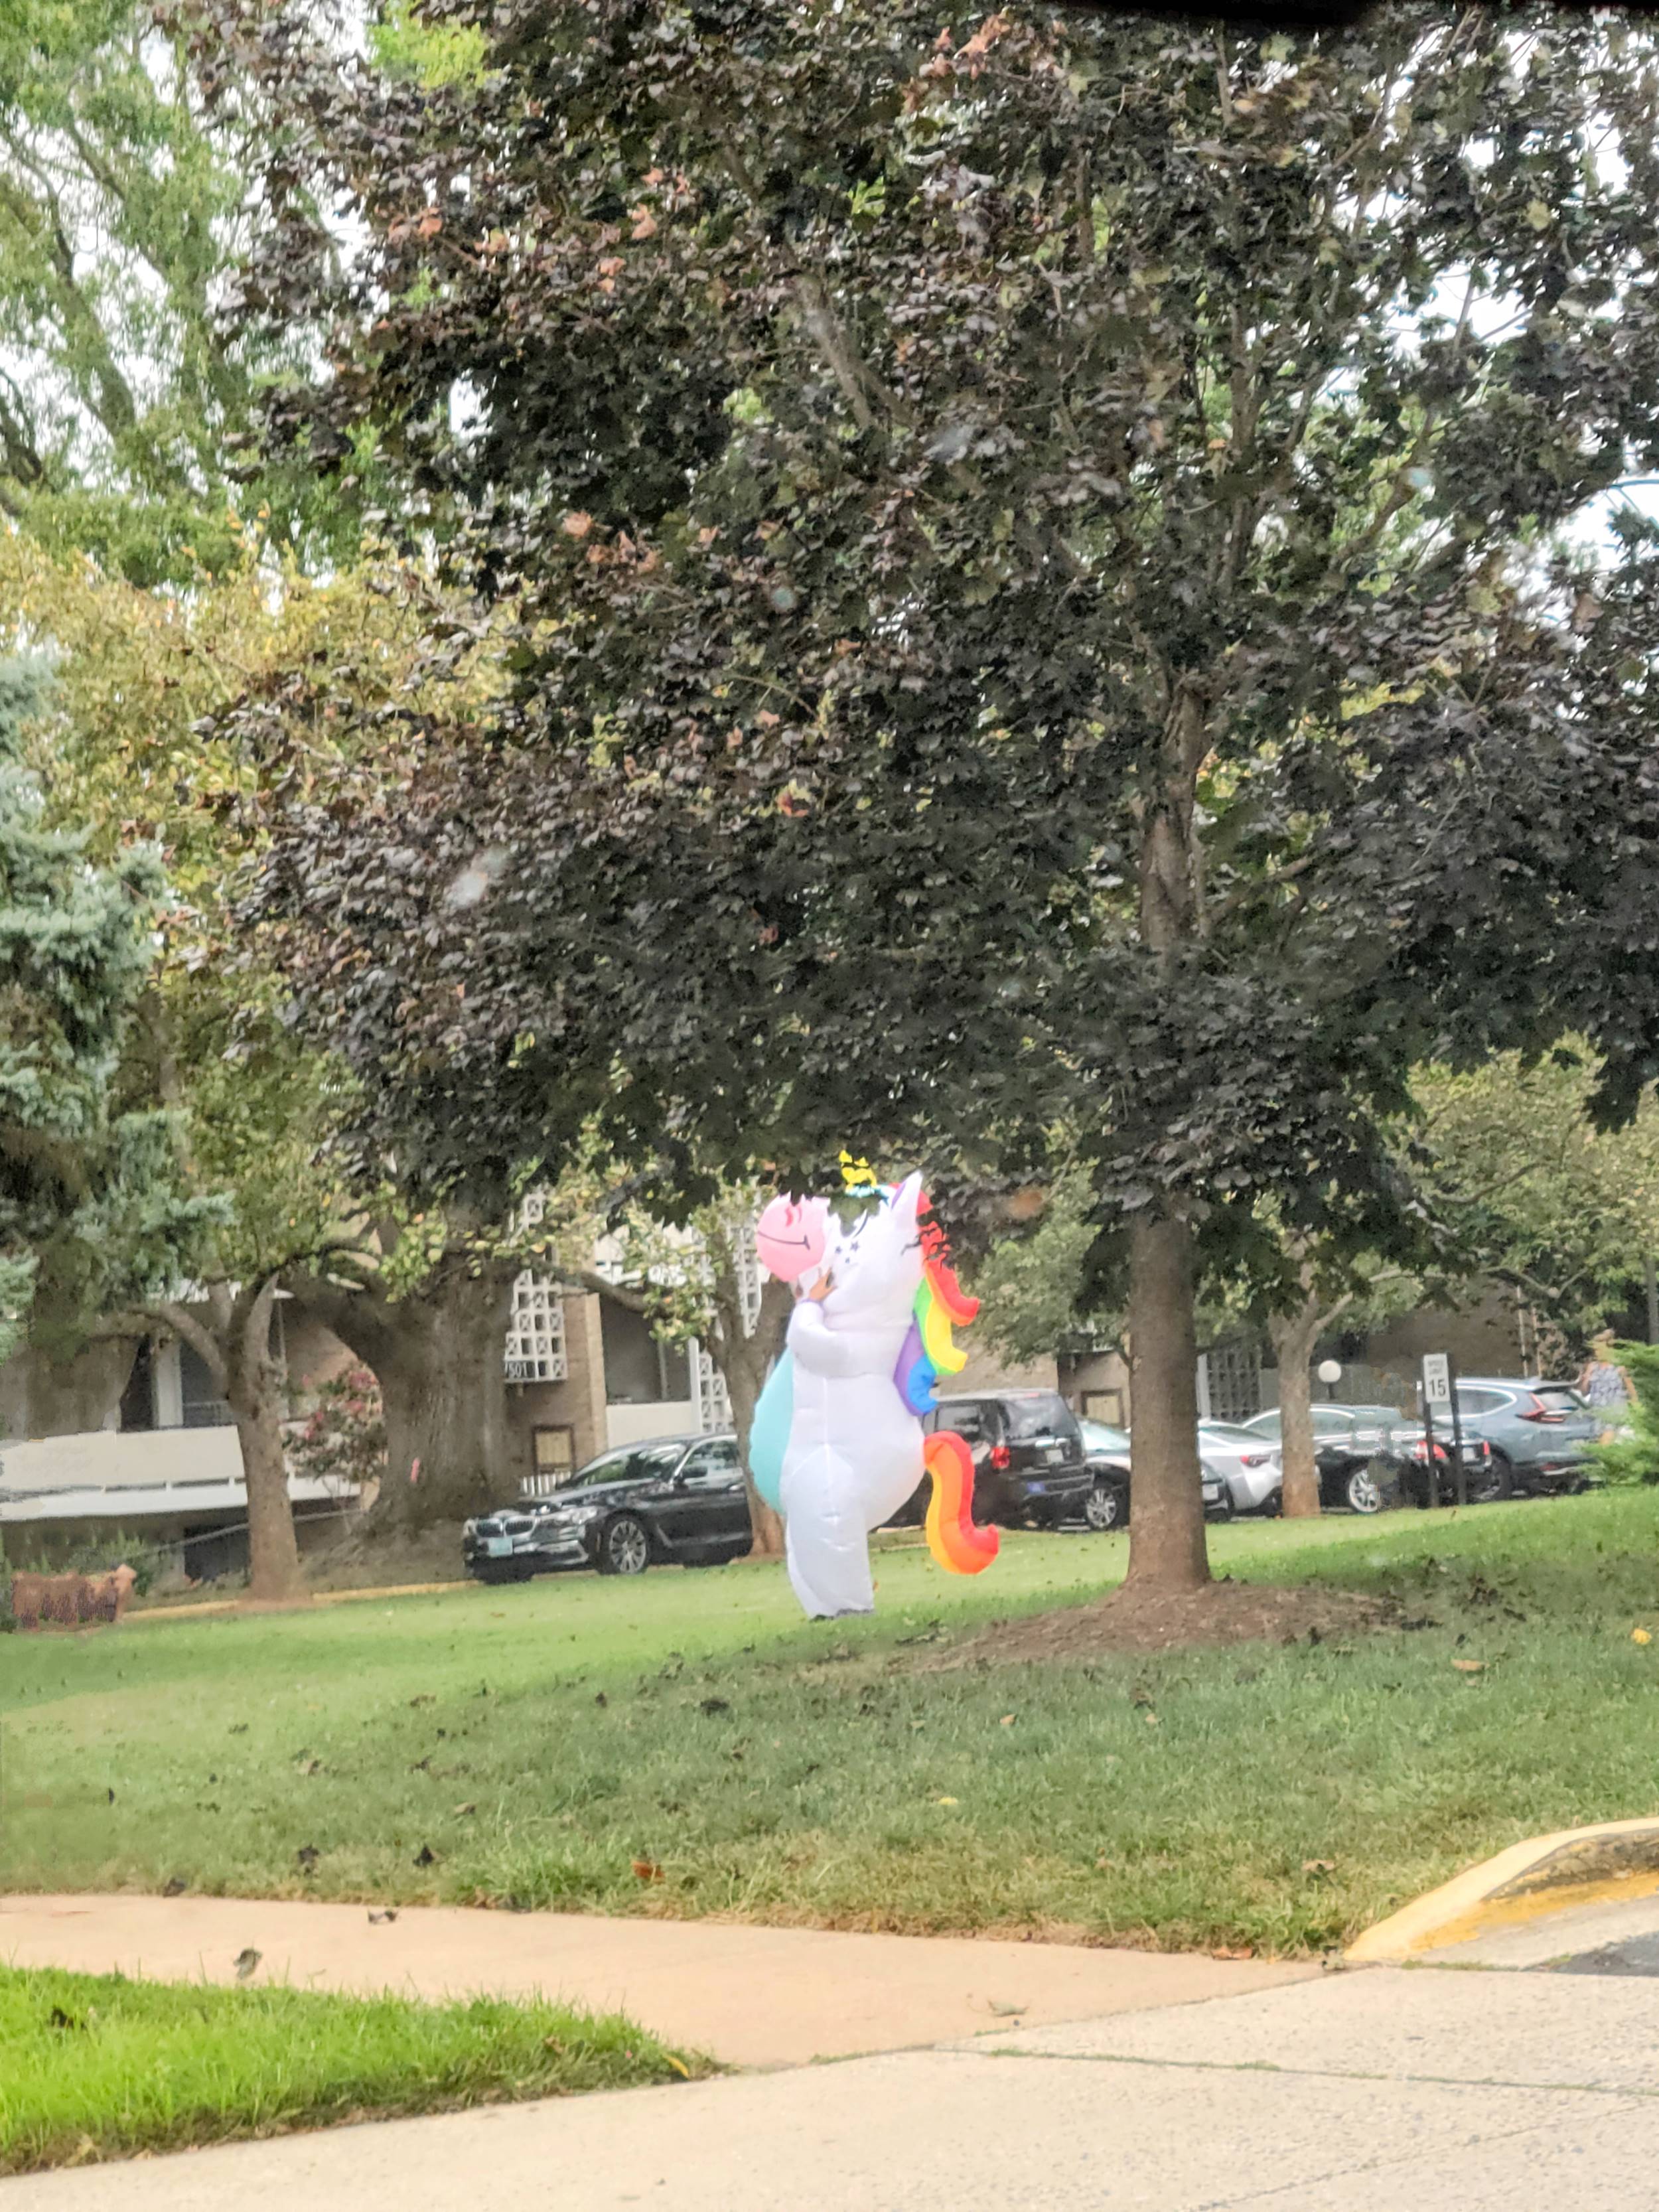 A person dressed up as a unicorn is in a field next to a large tree